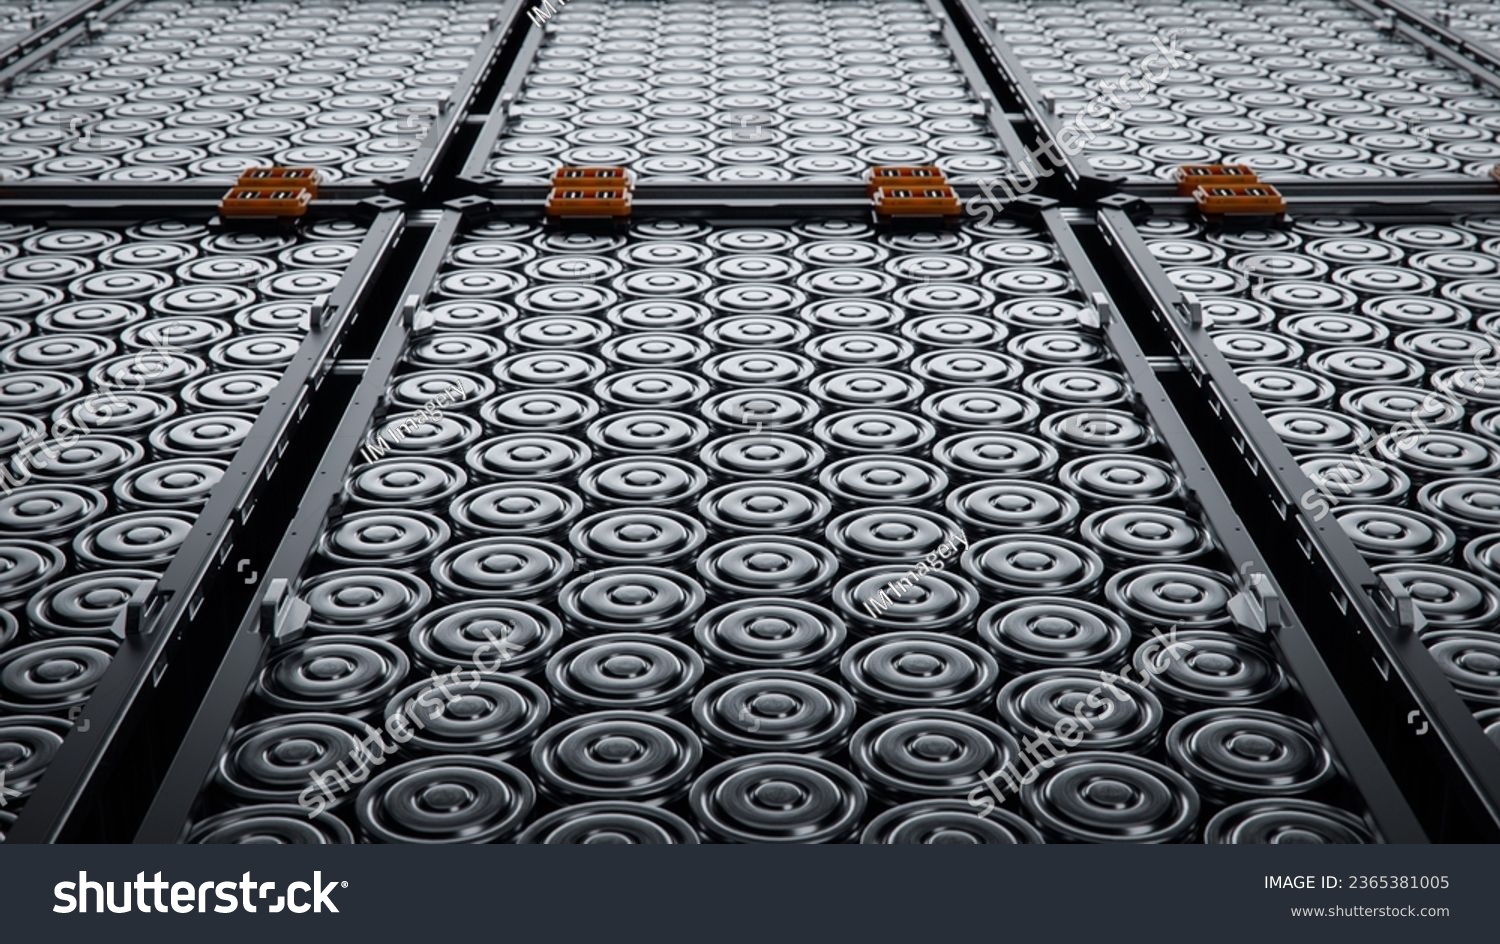 Close-up of EV Battery Cells Stacked inside Modules. Lithium-ion High-voltage Battery for Electric Vehicle or Hybrid Car. High Capacity Battery for Automotive Industry #2365381005